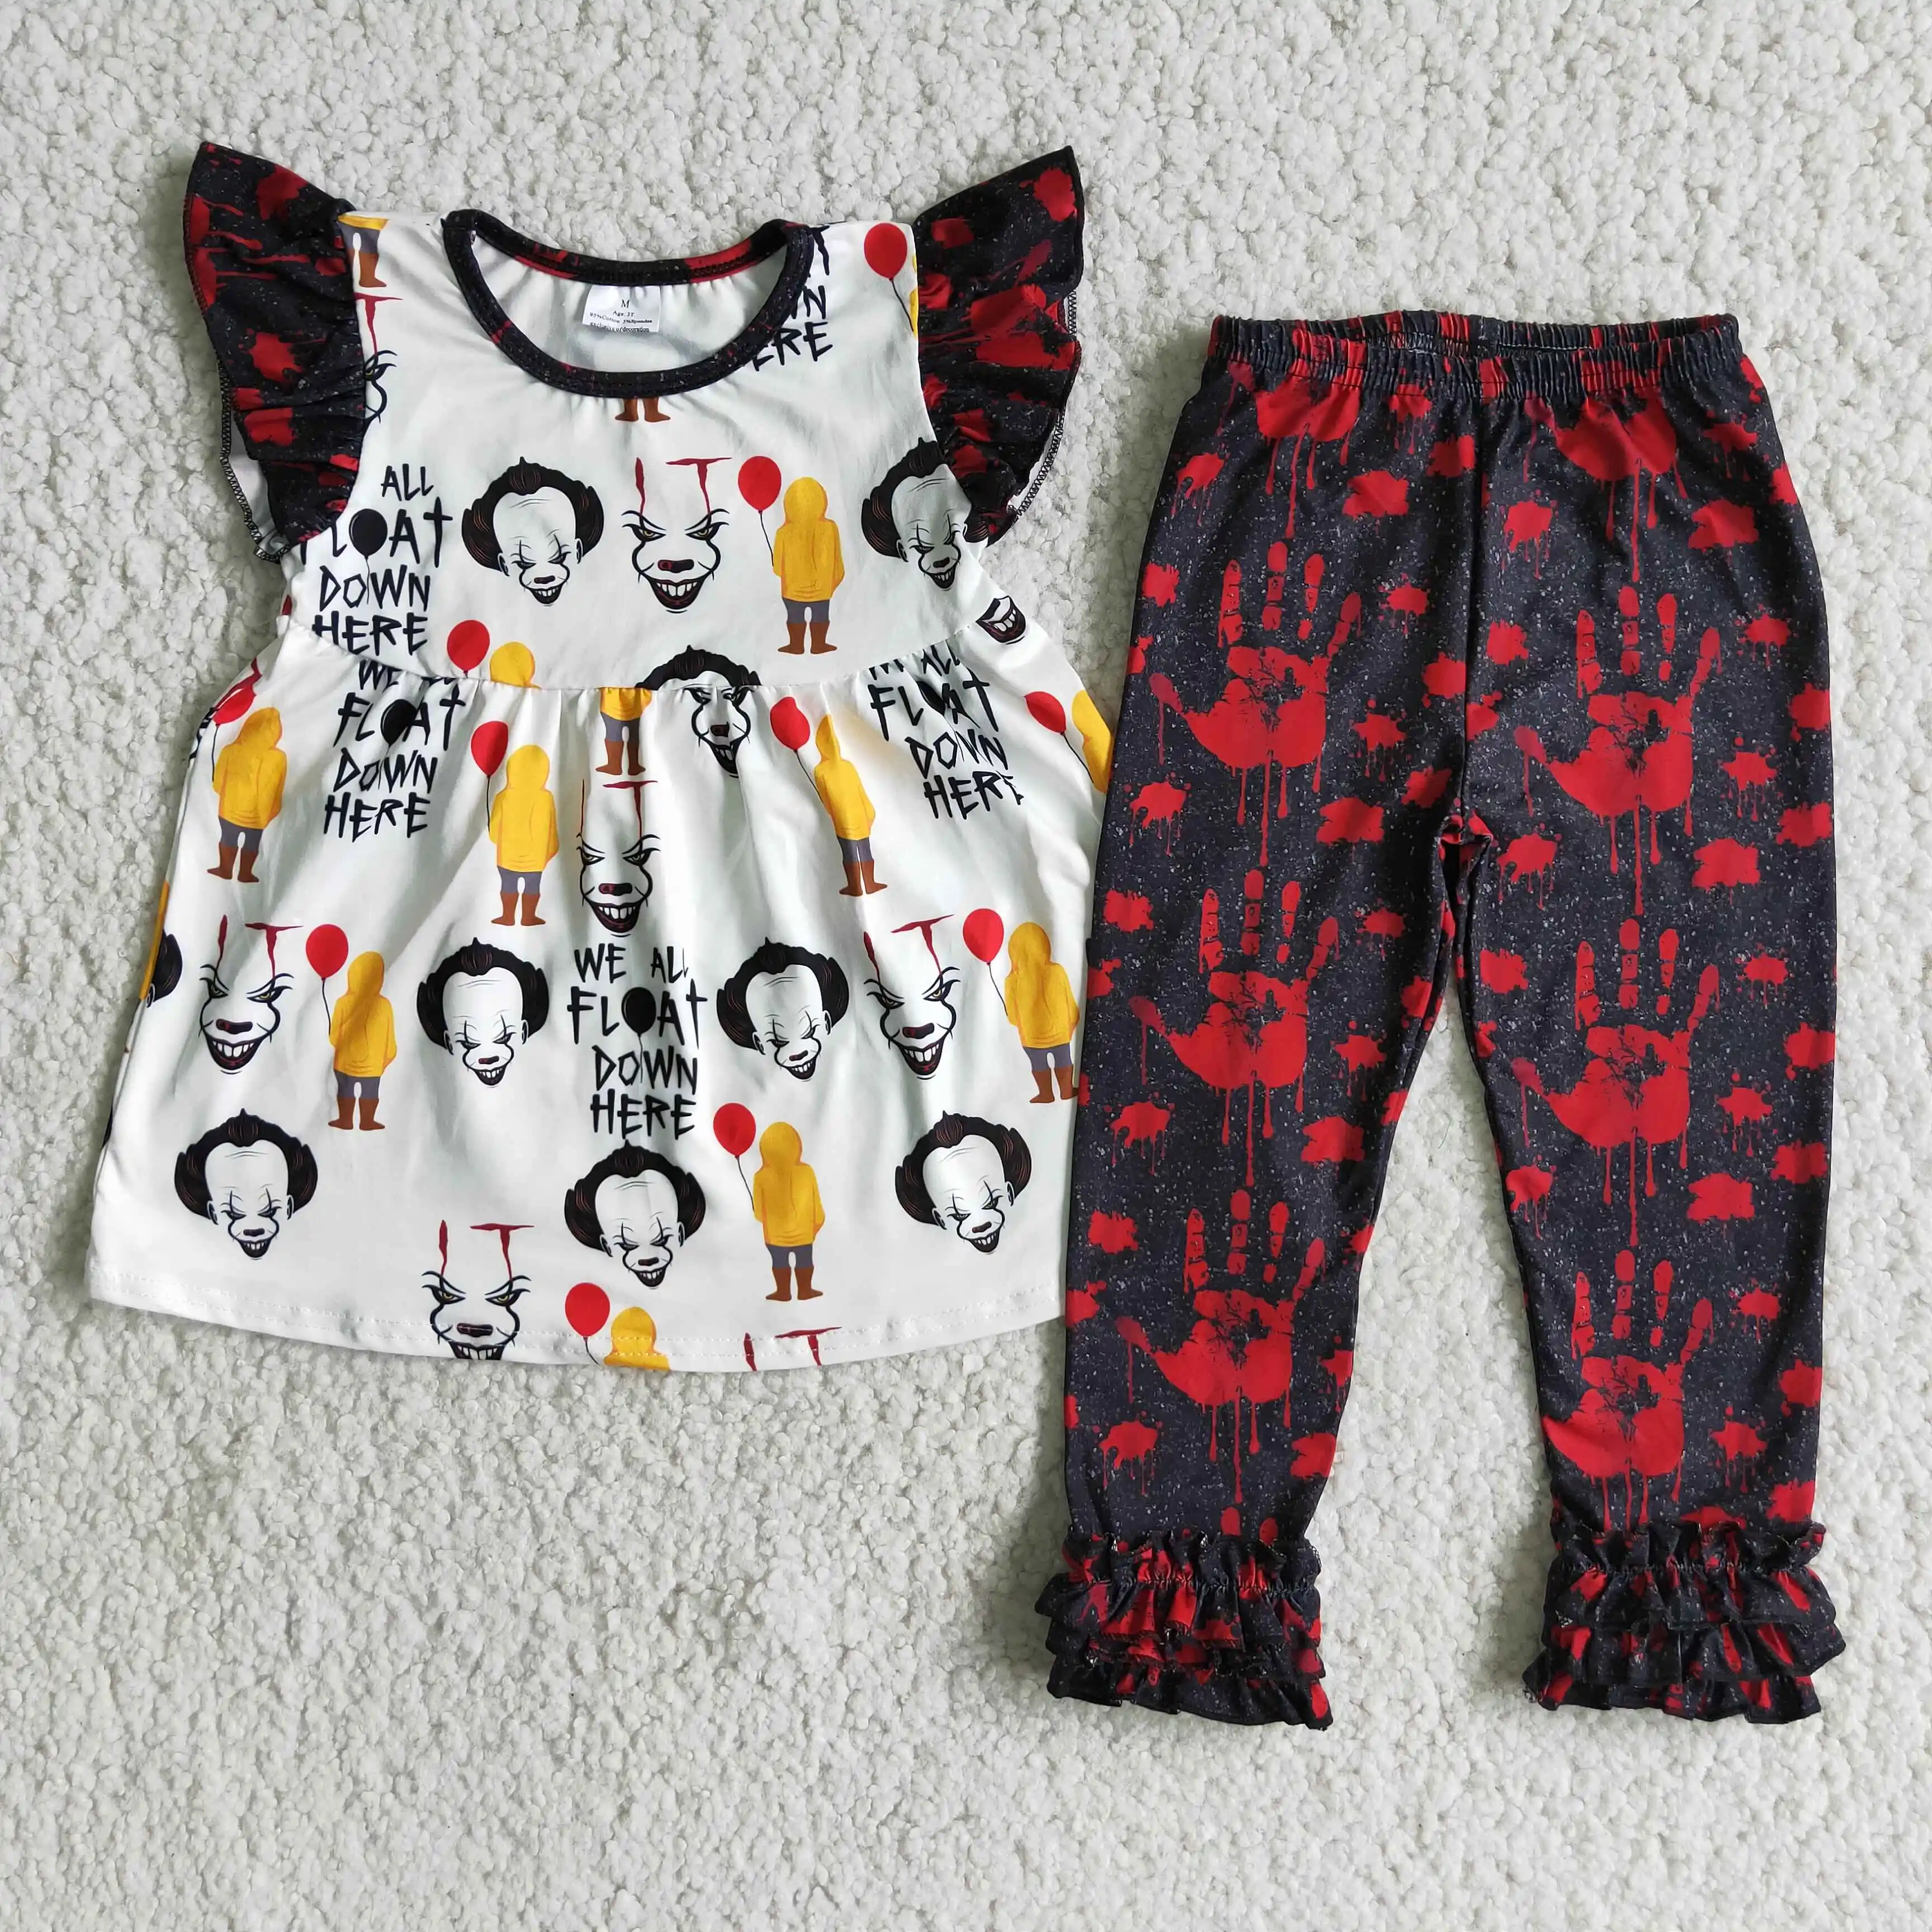 pajamas for newborn girl  Horror cartoon kids wear 2021 hot sale Christmas Eve nightmare outfit baby girl bell bottom fashion 2-piece set newborn clothes set Clothing Sets